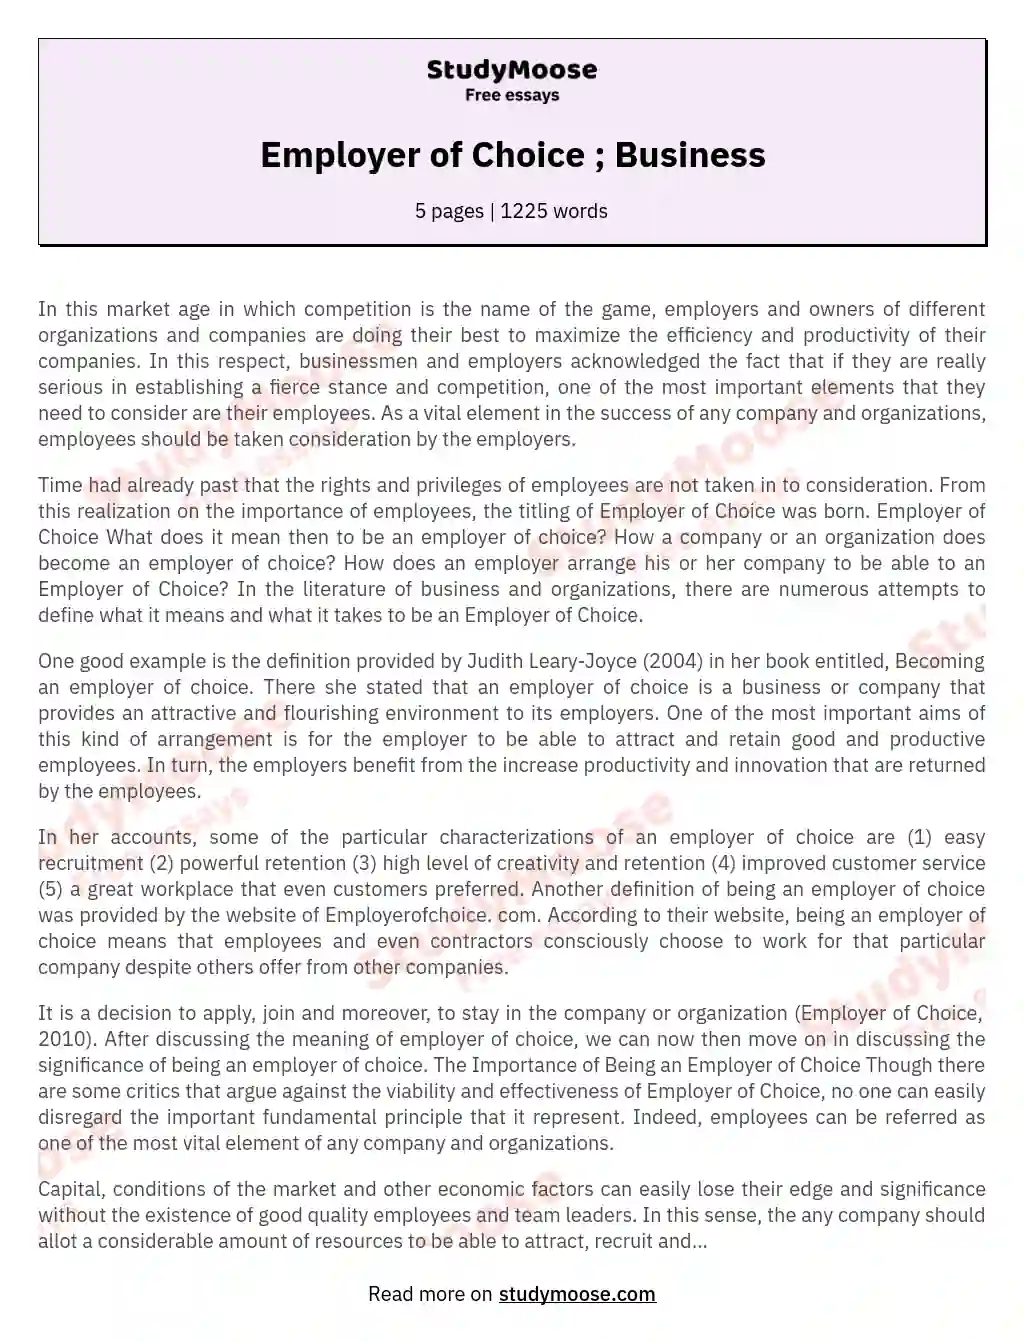 Employer of Choice ; Business essay